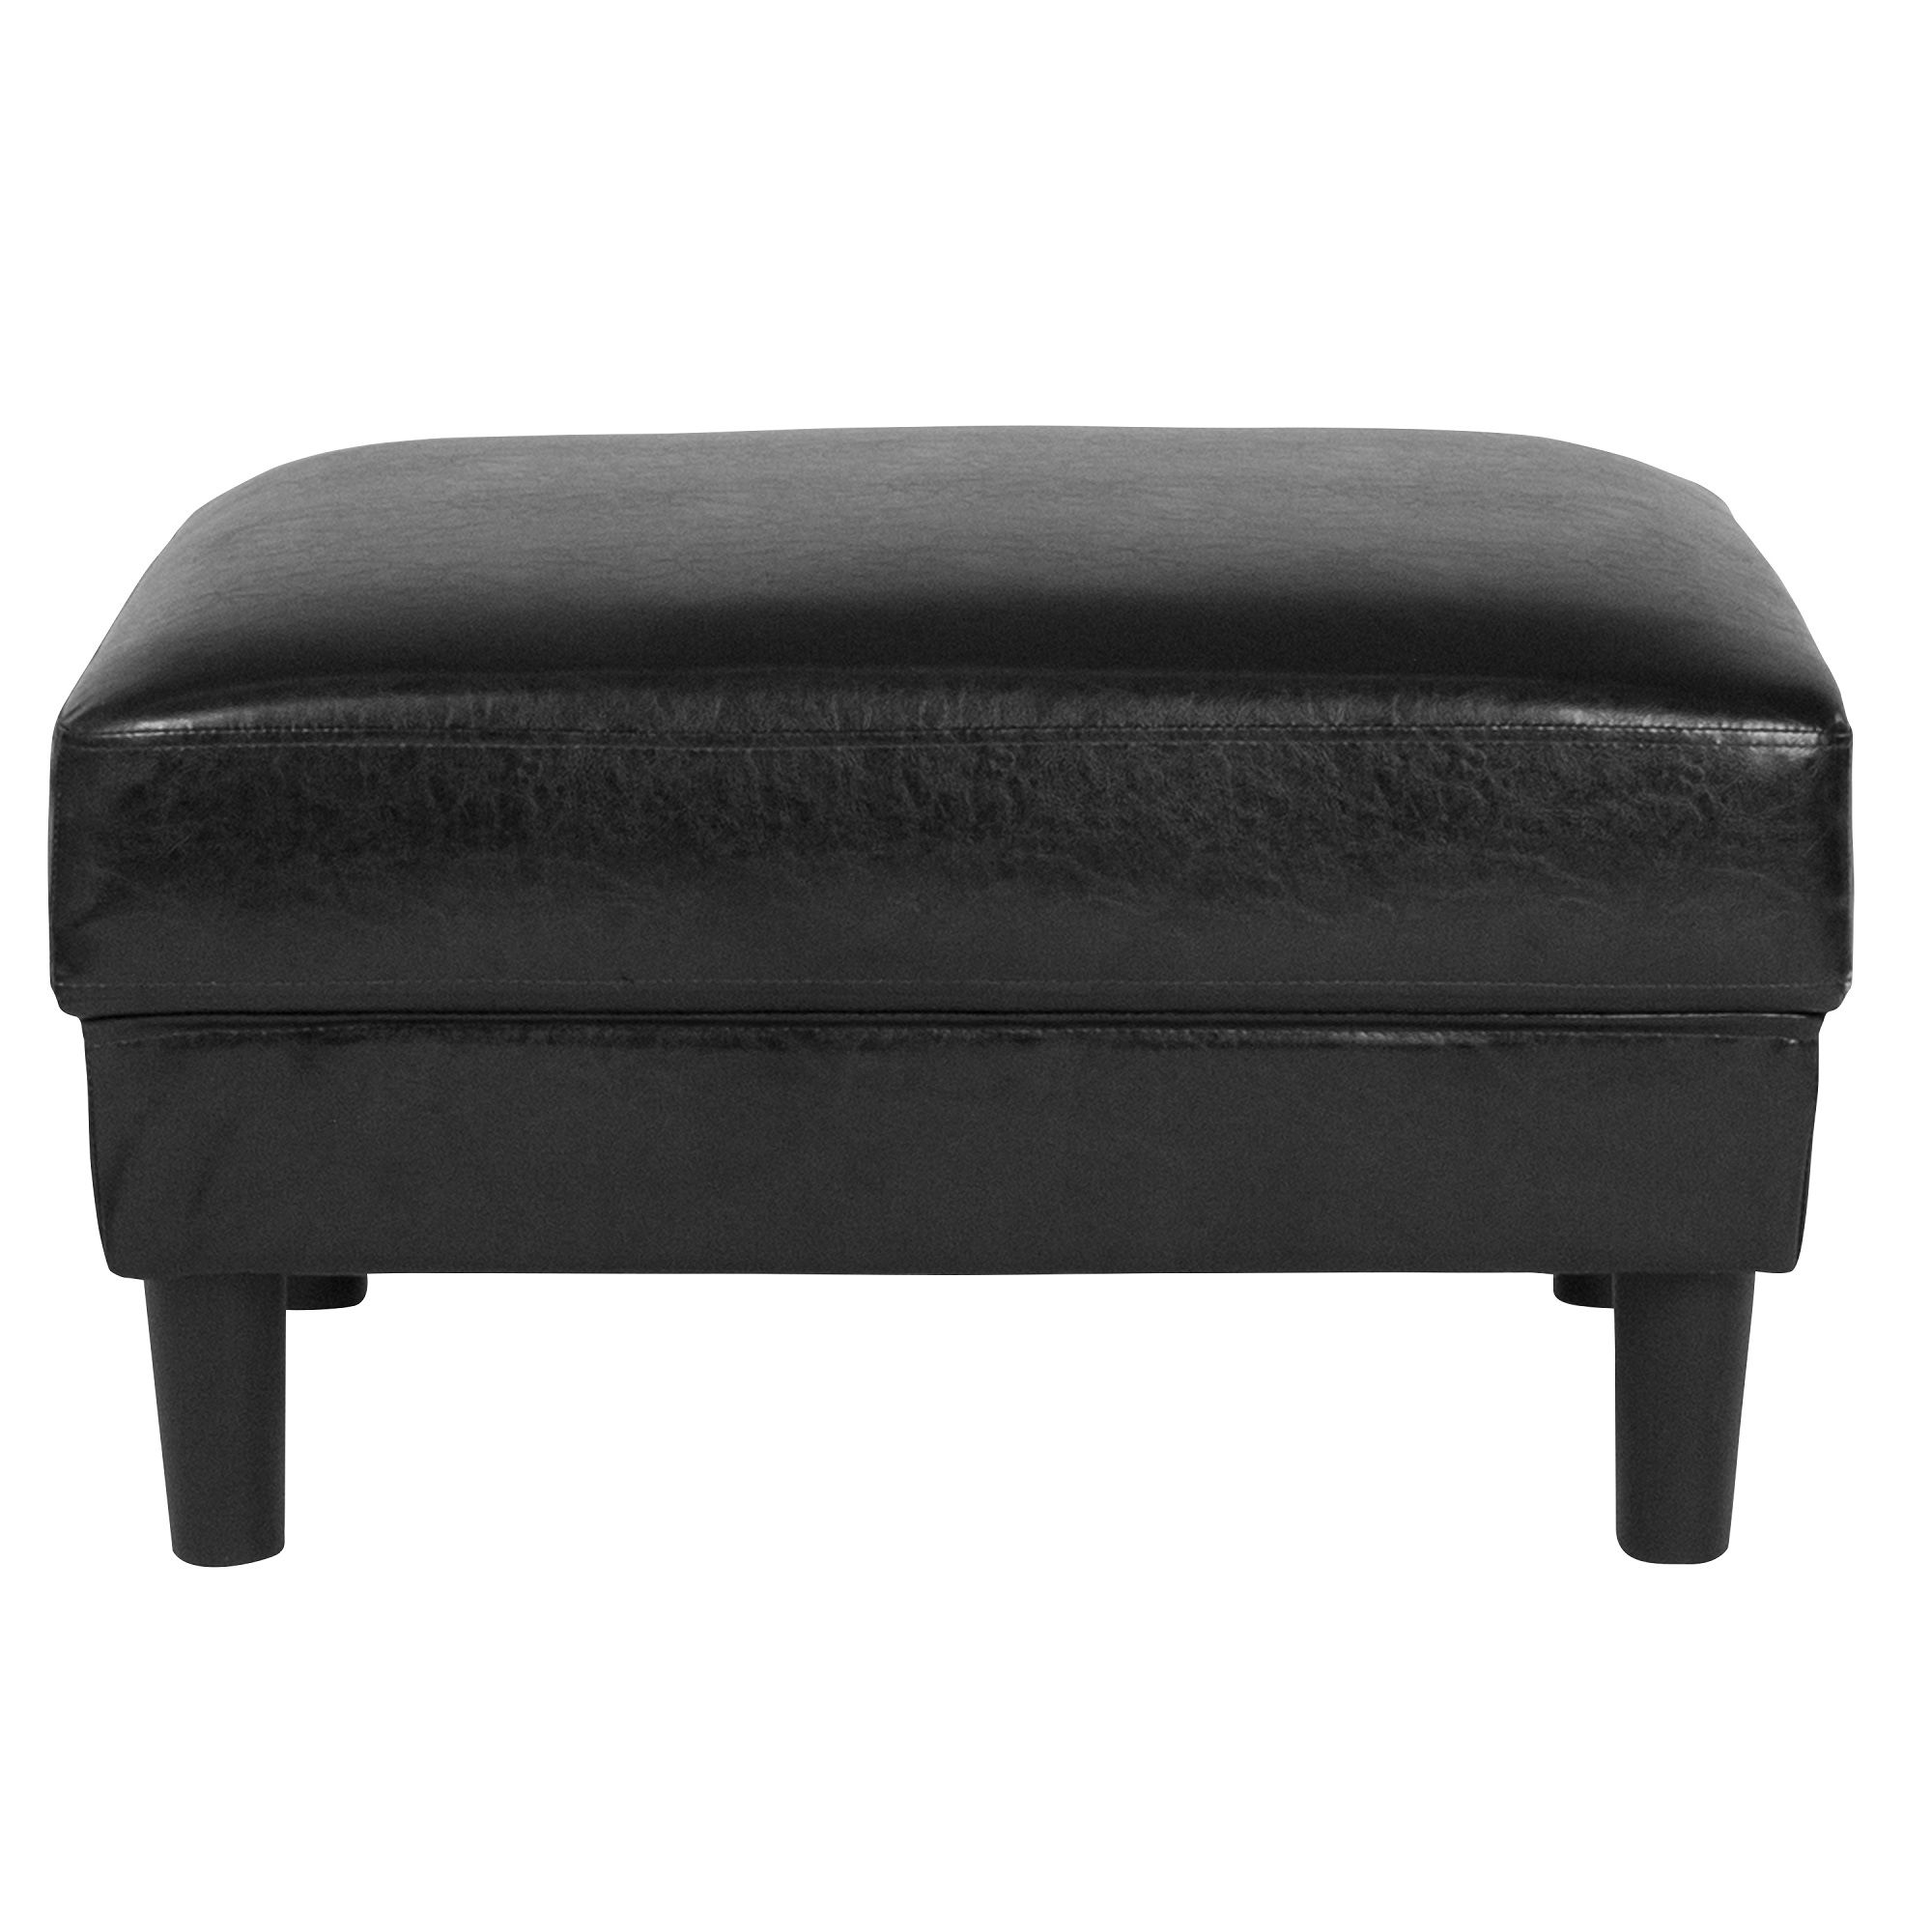 34" Black Leather Upholstered Rectangular Foot Stool Ottoman – Walmart Inside Black Leather Ottomans (View 12 of 20)